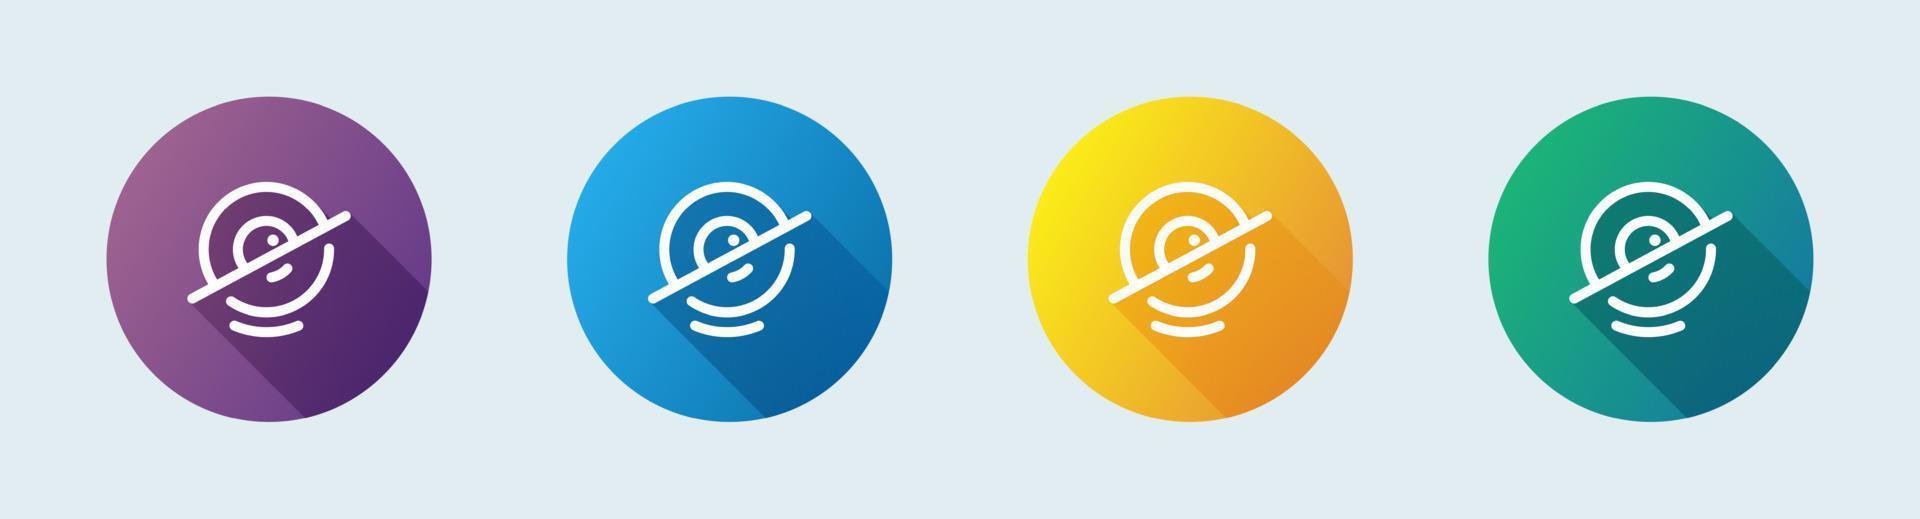 Webcam off line icon in flat design style. Disconnect signs vector illustration.